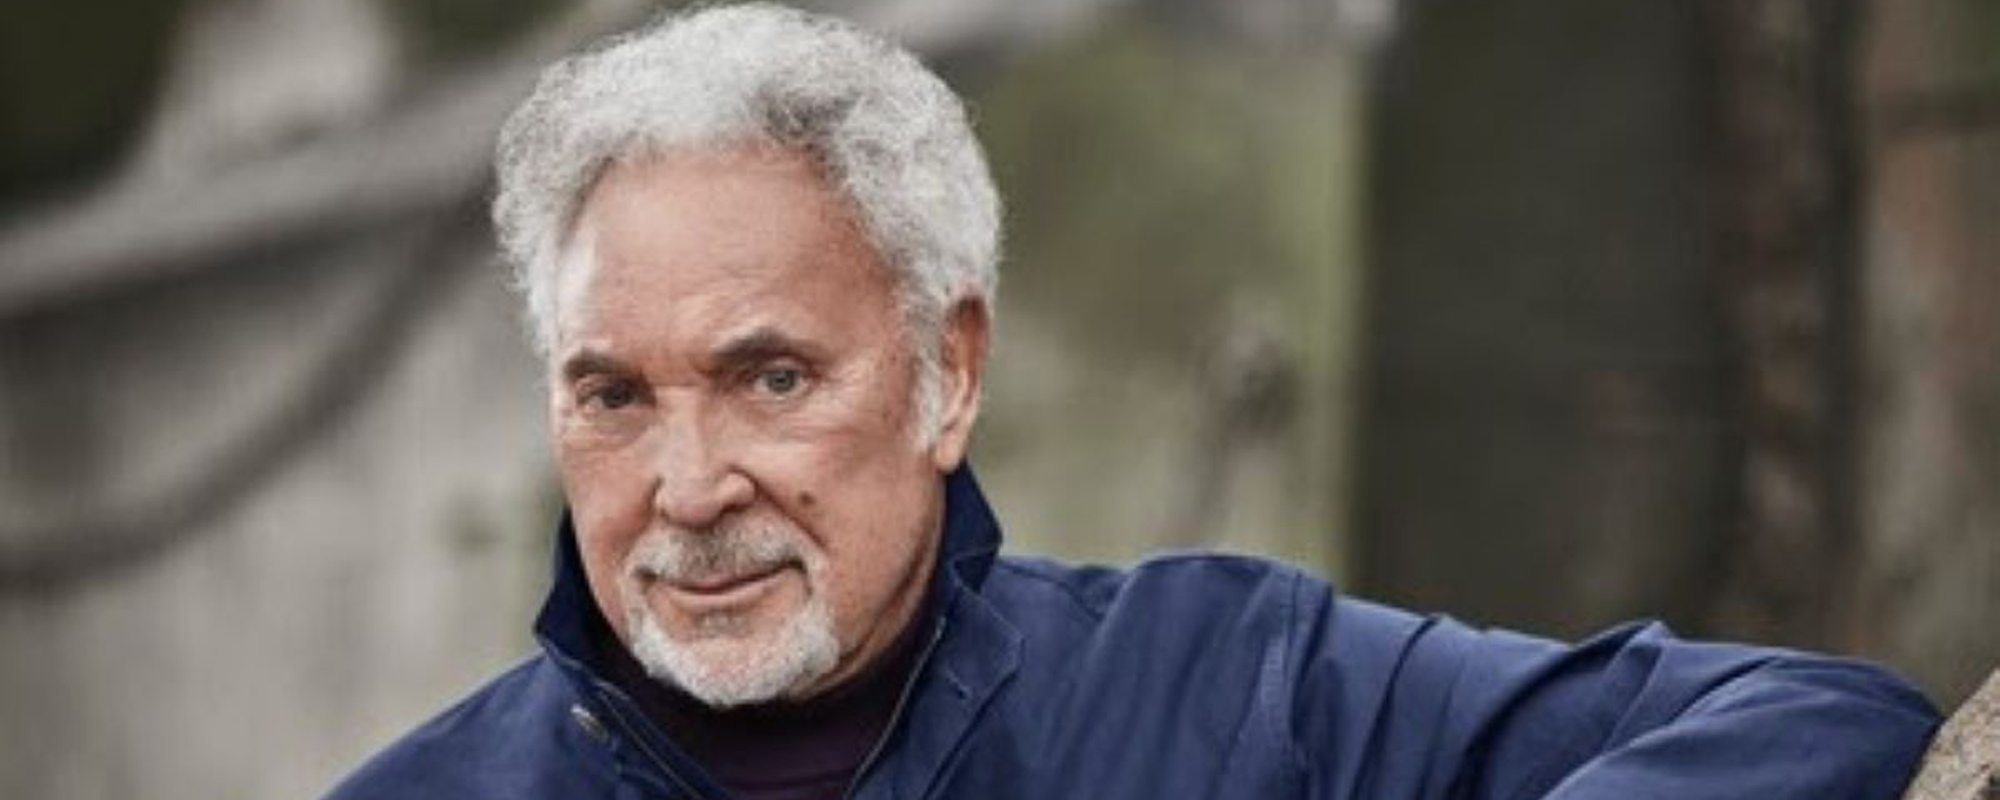 Tom Jones Gets Personal on New Album ’Surrounded By Time‘